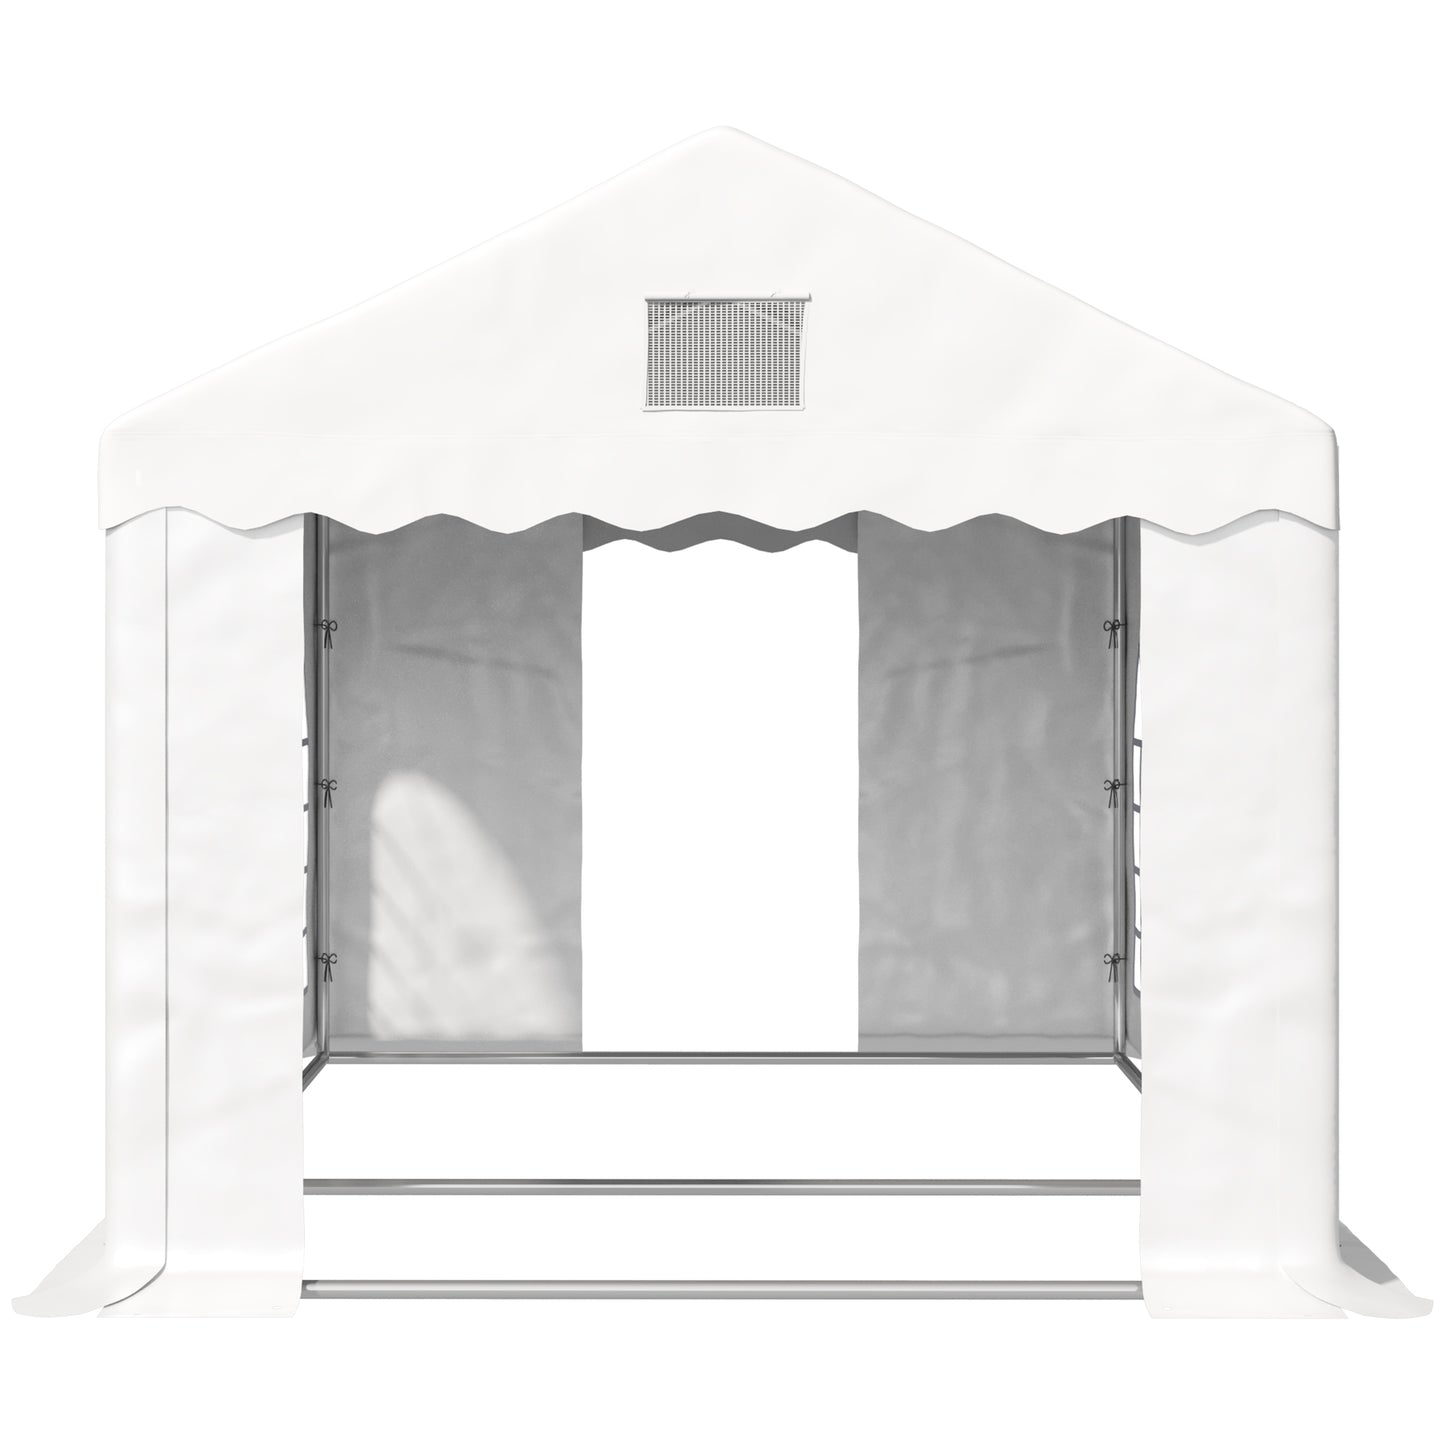 Outsunny Party Tent Gazebo with Removable Side Walls, 6 x 3m, Outdoor Event Shelter, White